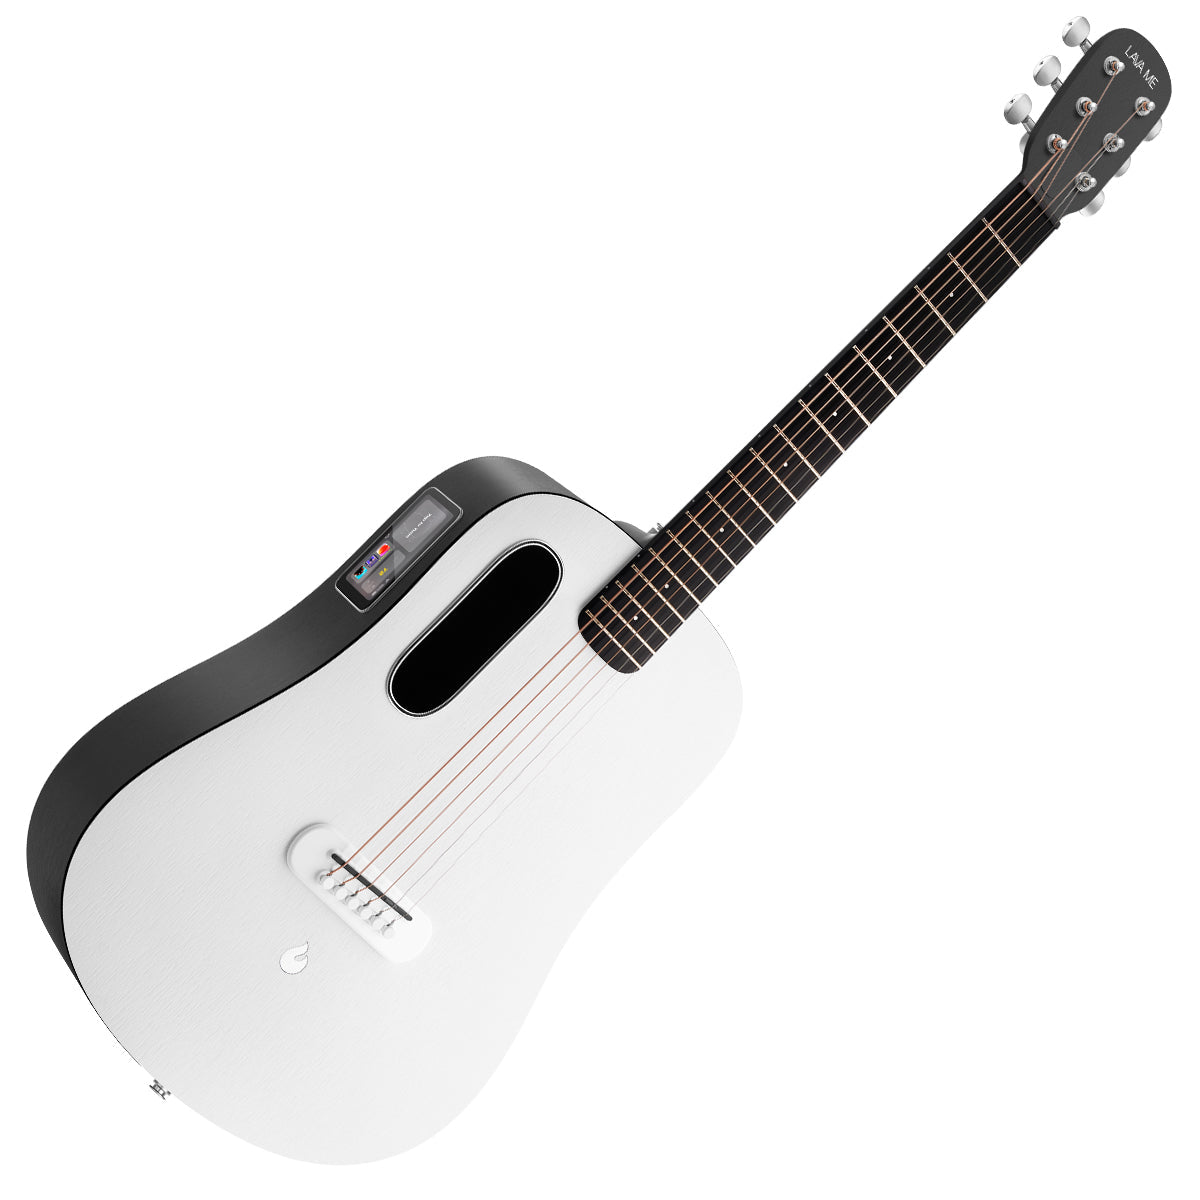 LAVA ME PLAY 36" with Lite Bag ~ Nightfall/Frost White, Acoustic Guitar for sale at Richards Guitars.